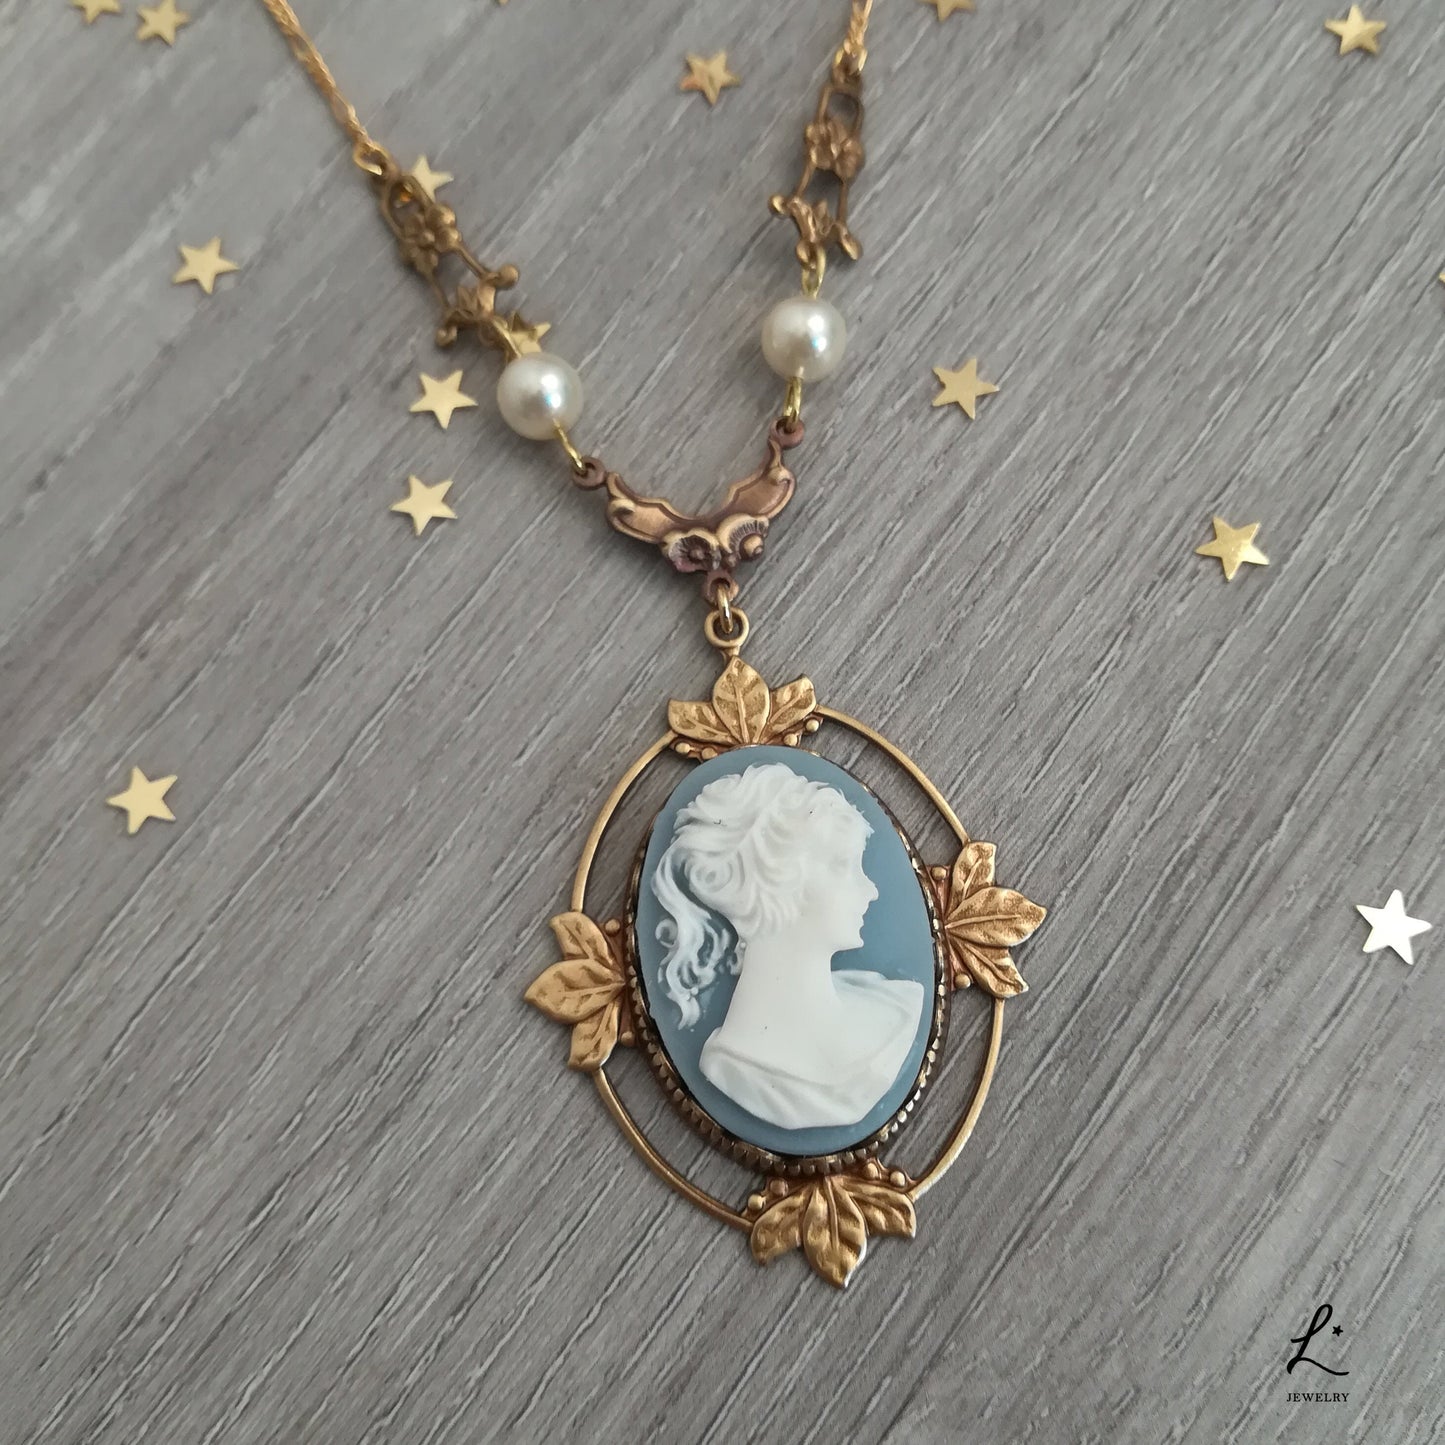 Victorian Cameo Necklace with floral accents, improved silver